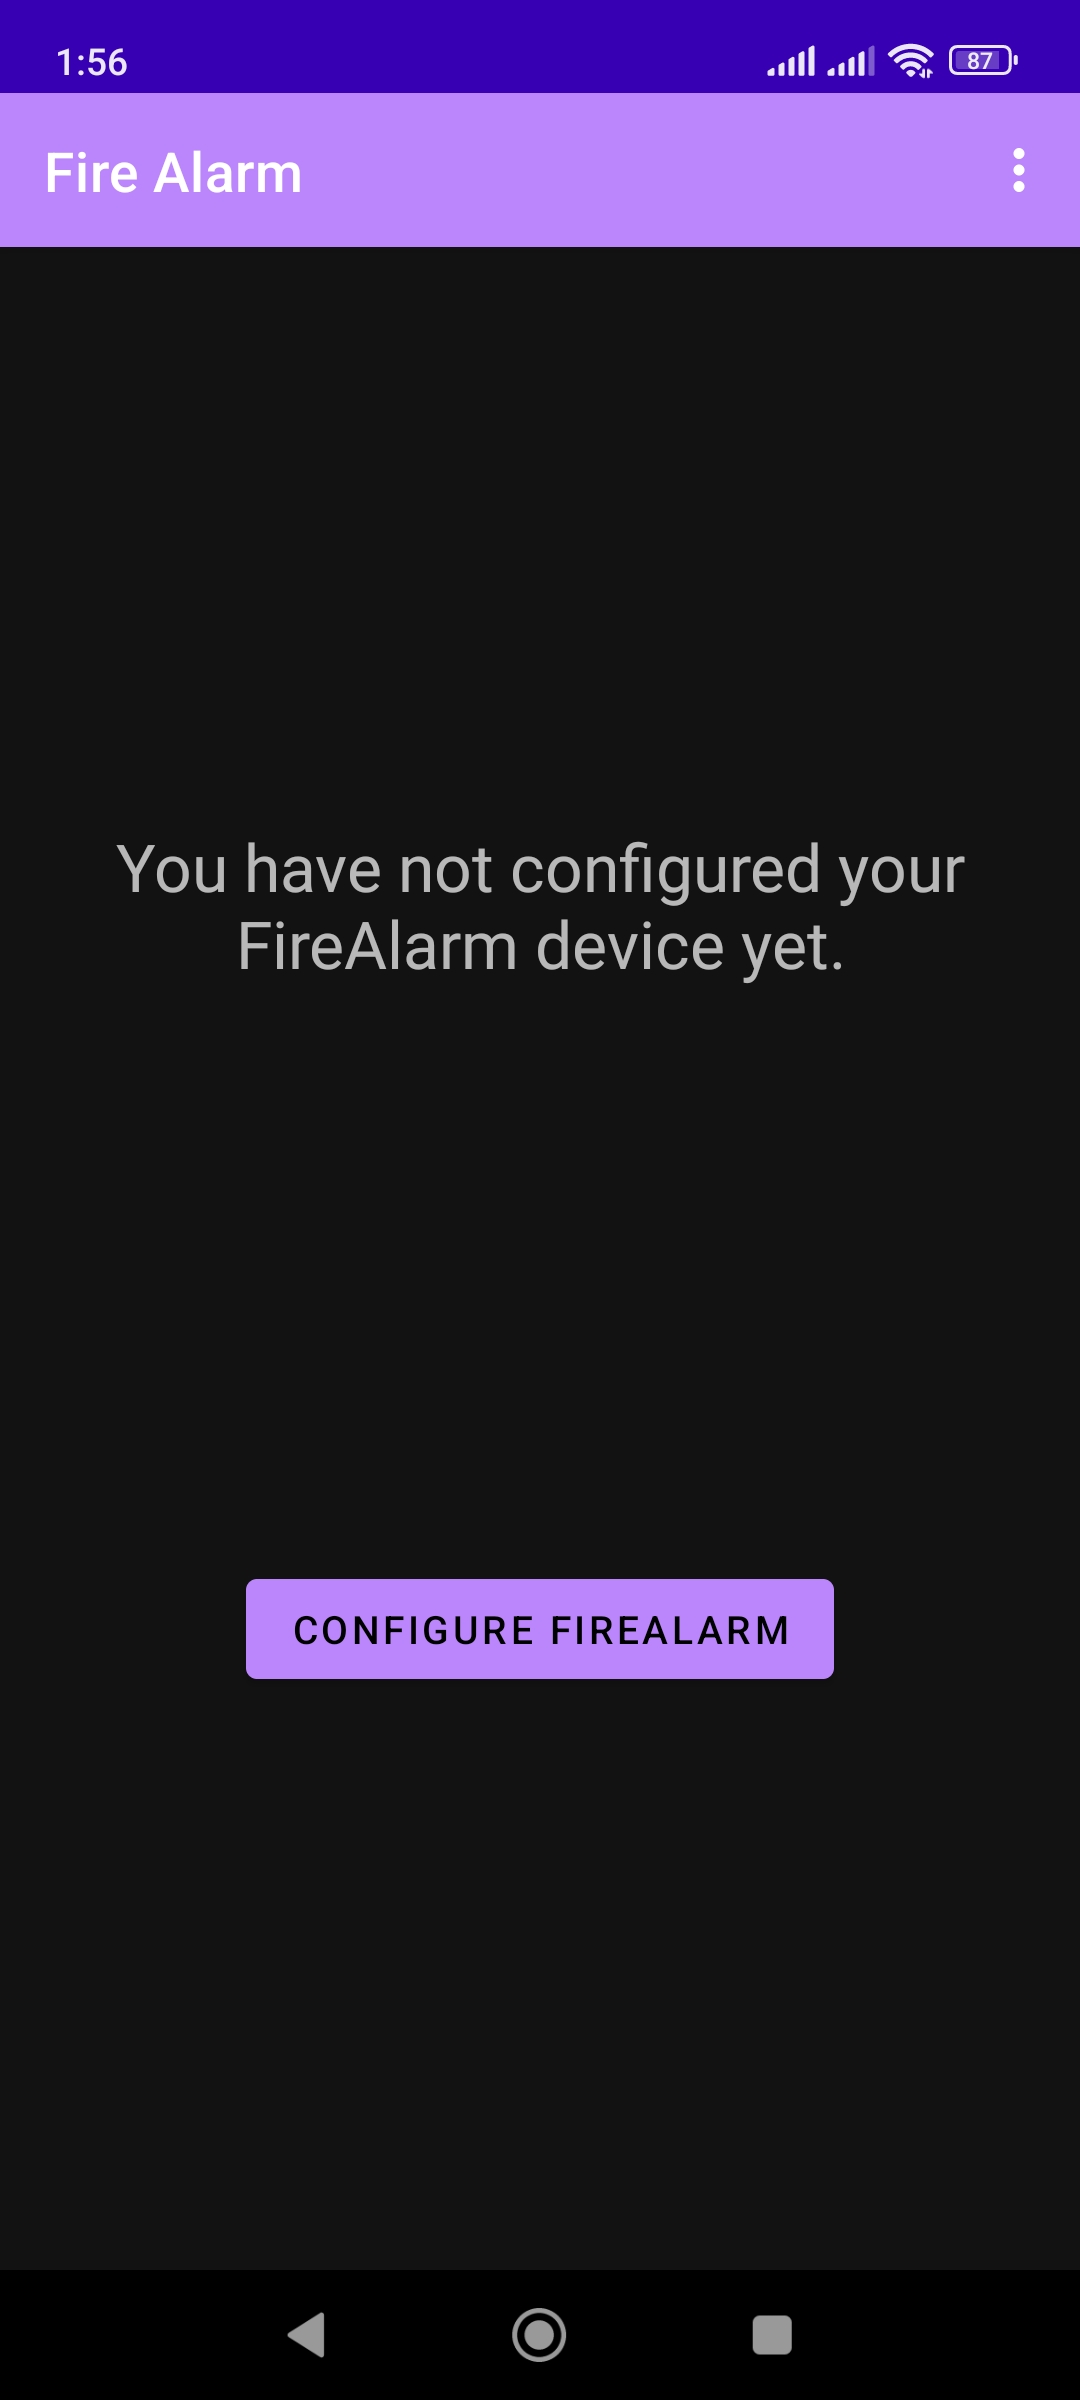 fire-alarm-android-startup.jpg